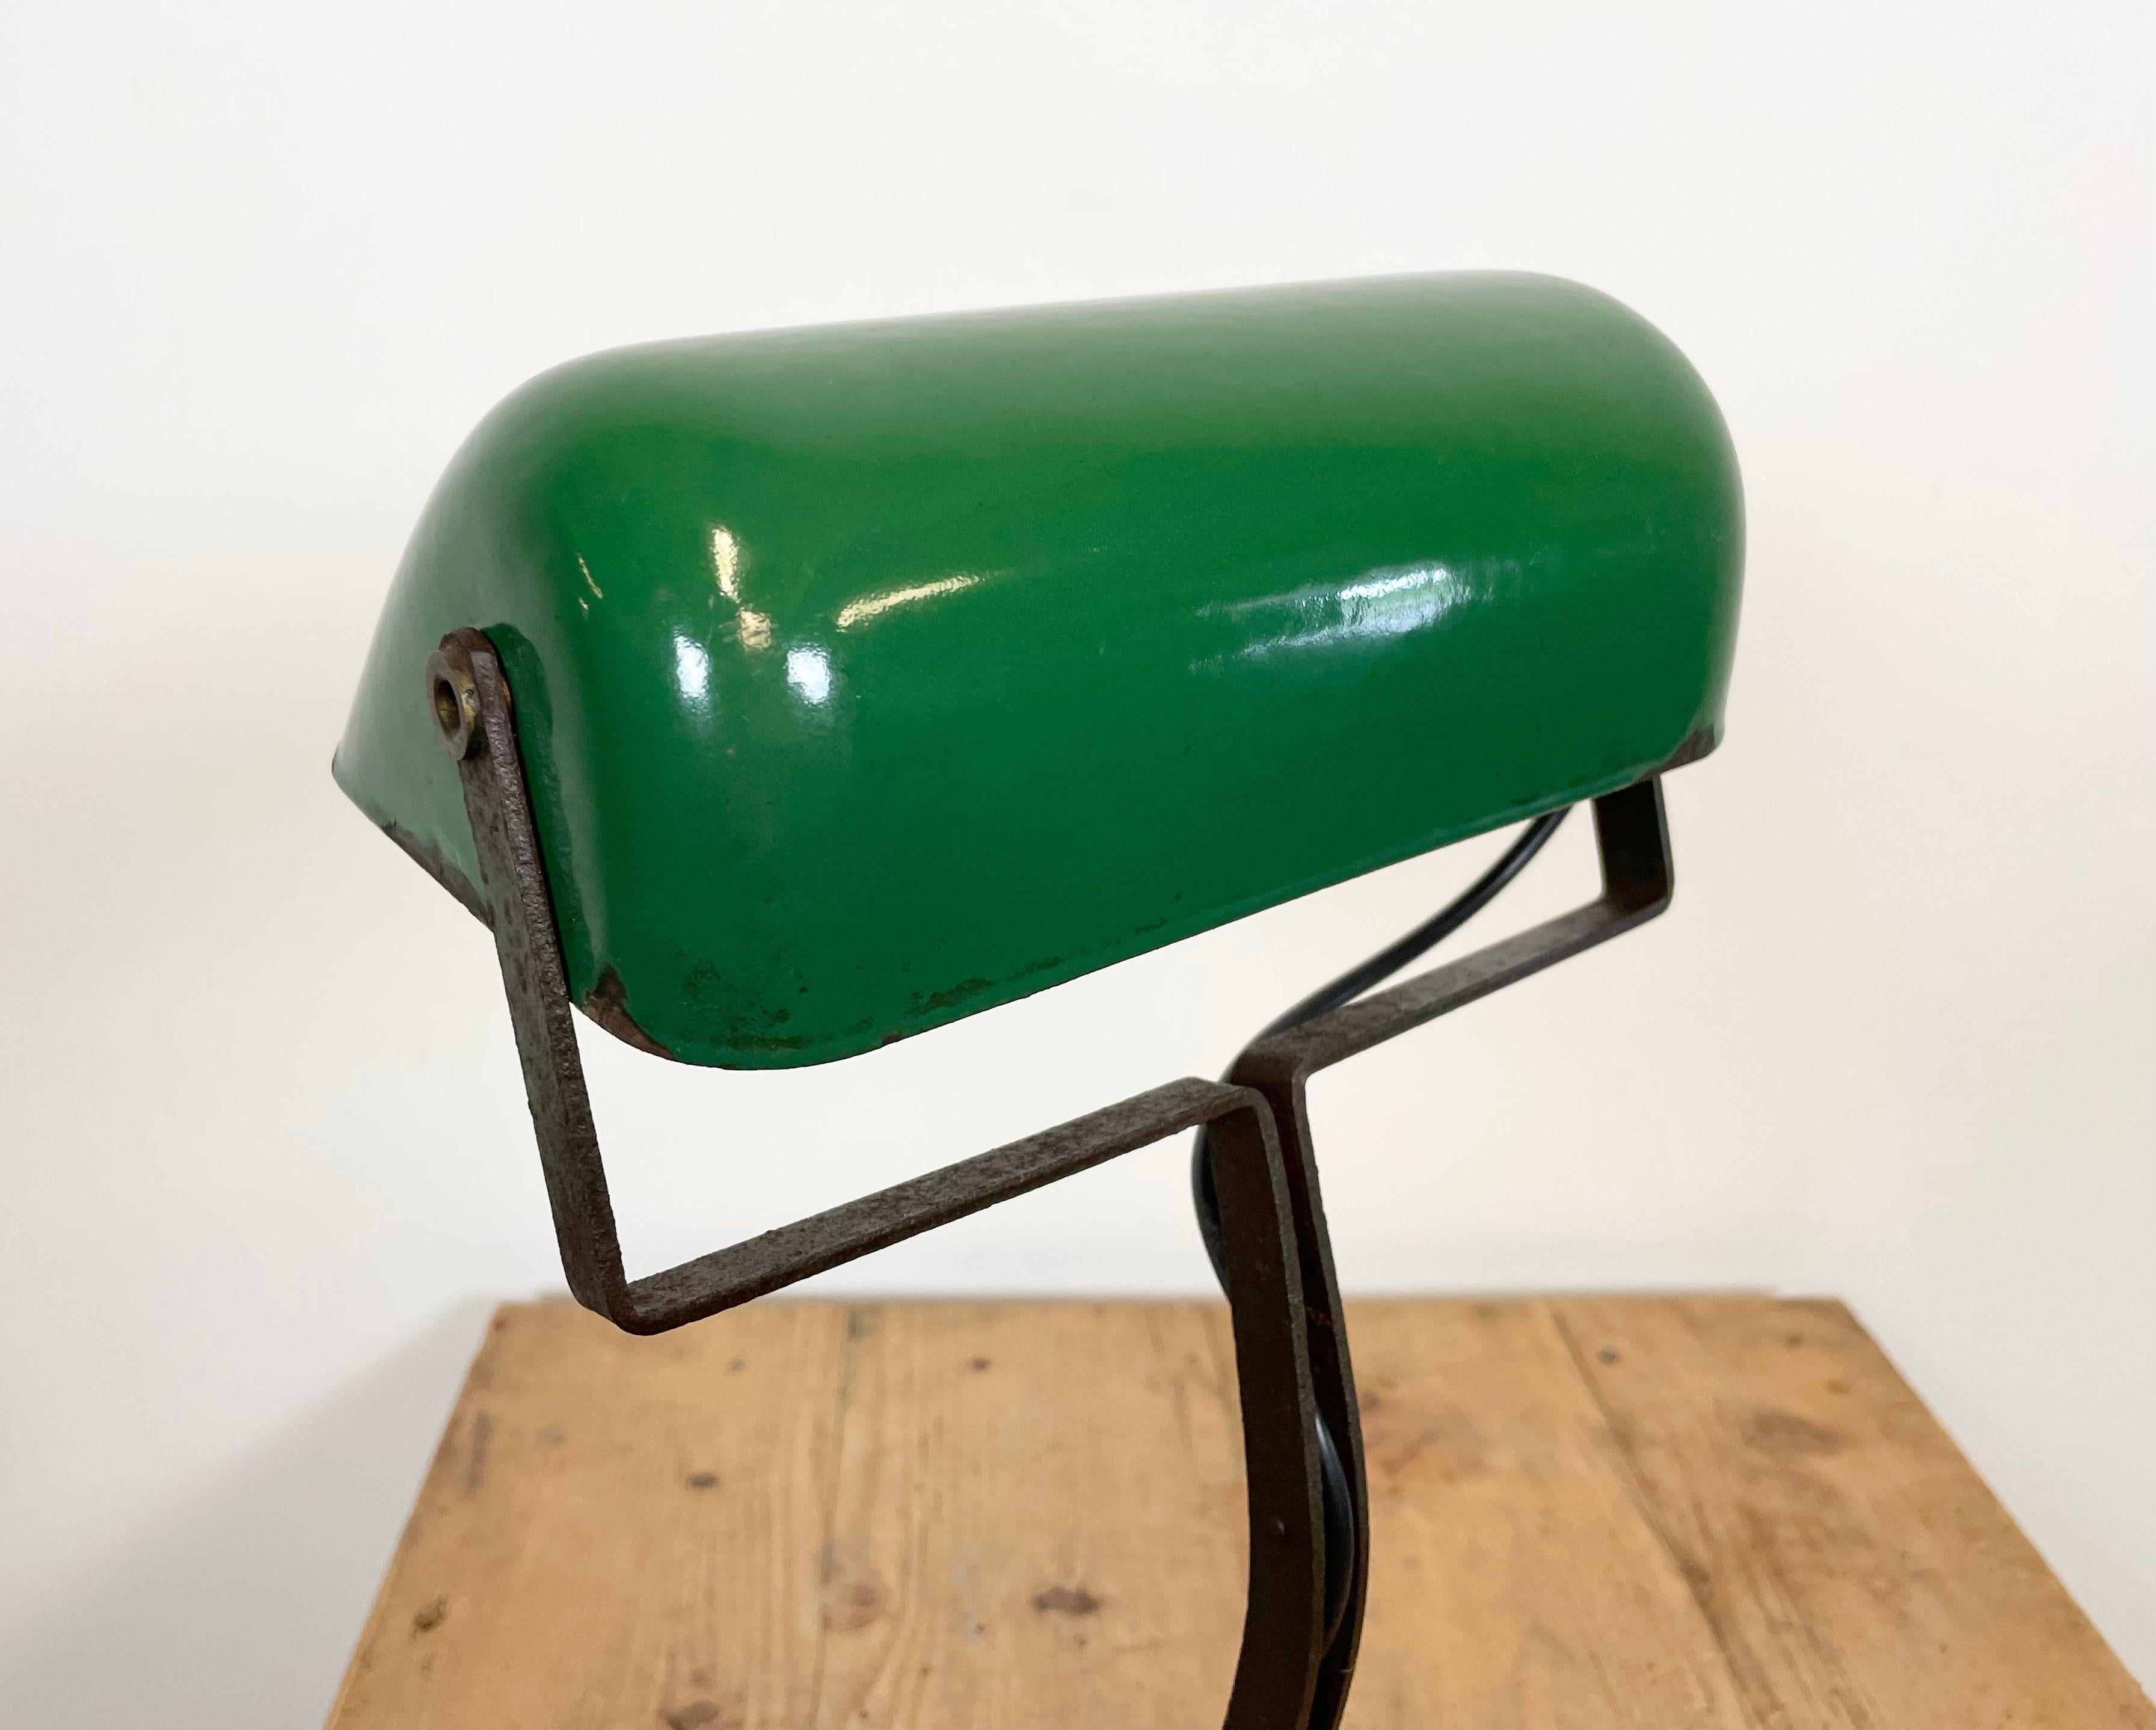 Vintage Green Enamel Bank Lamp from Astral, 1930s For Sale 4